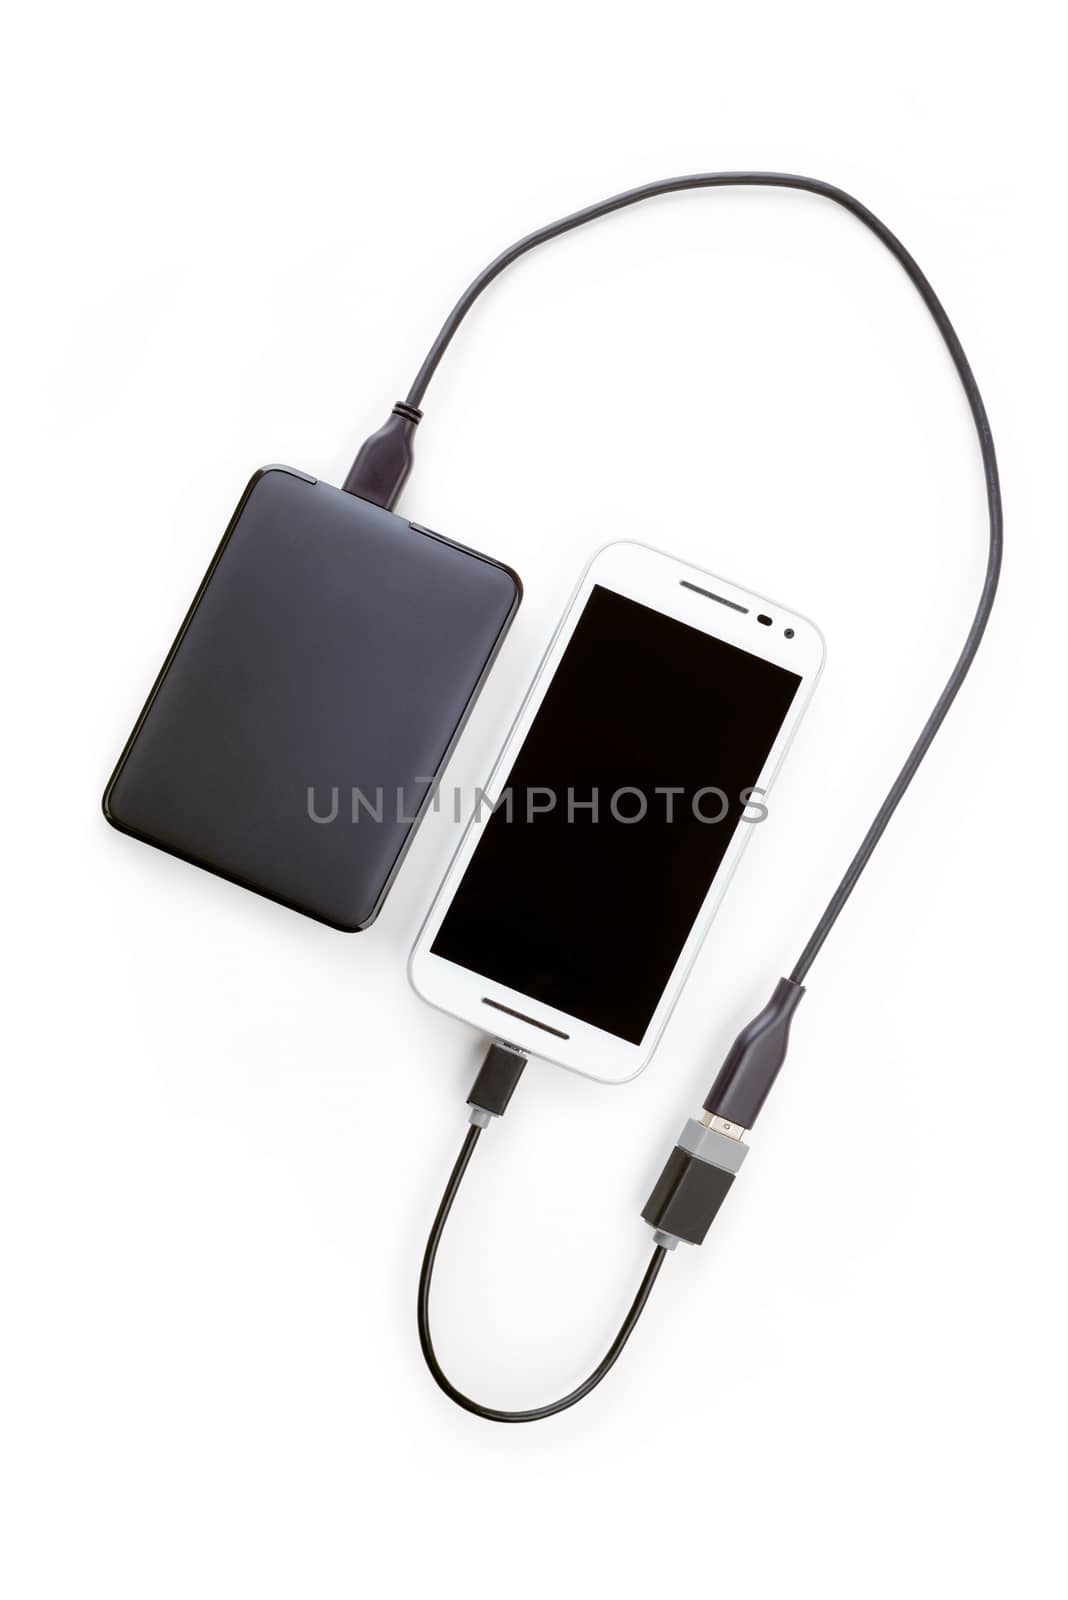 White smartphone connected to a black hard disk drive with an OT by MaxalTamor